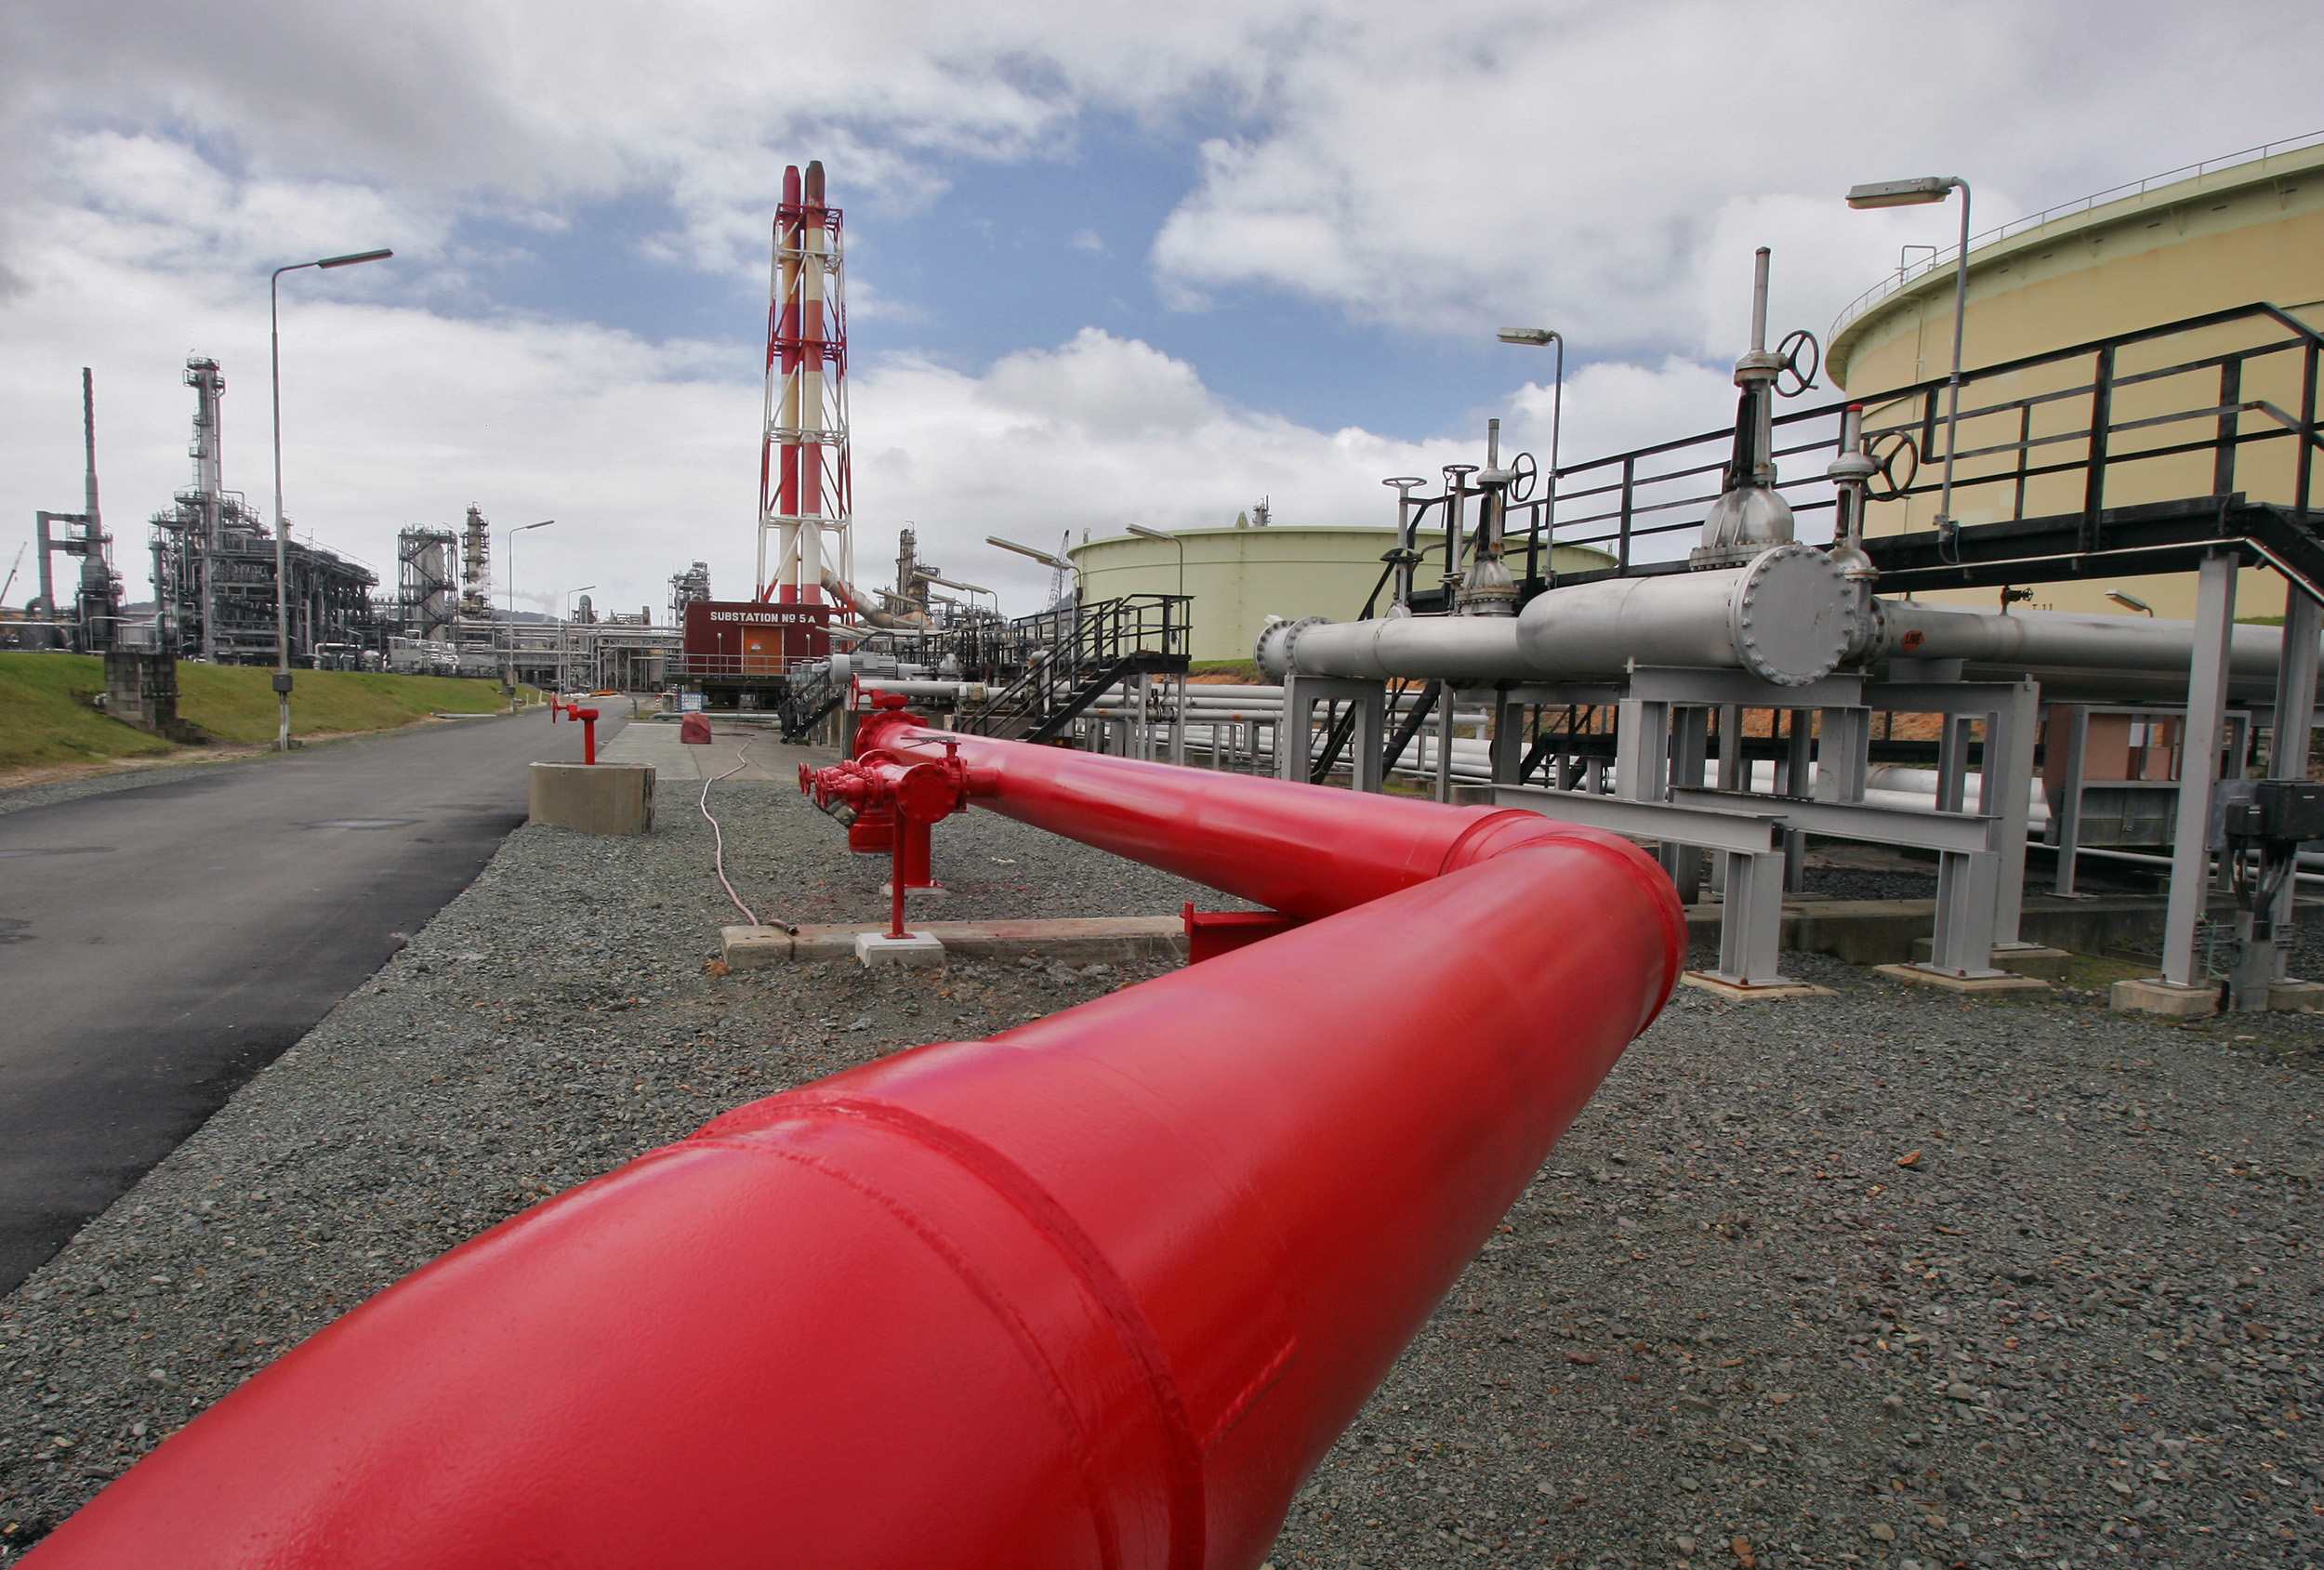 New Zealand to Lift Ban on Oil and Gas Exploration